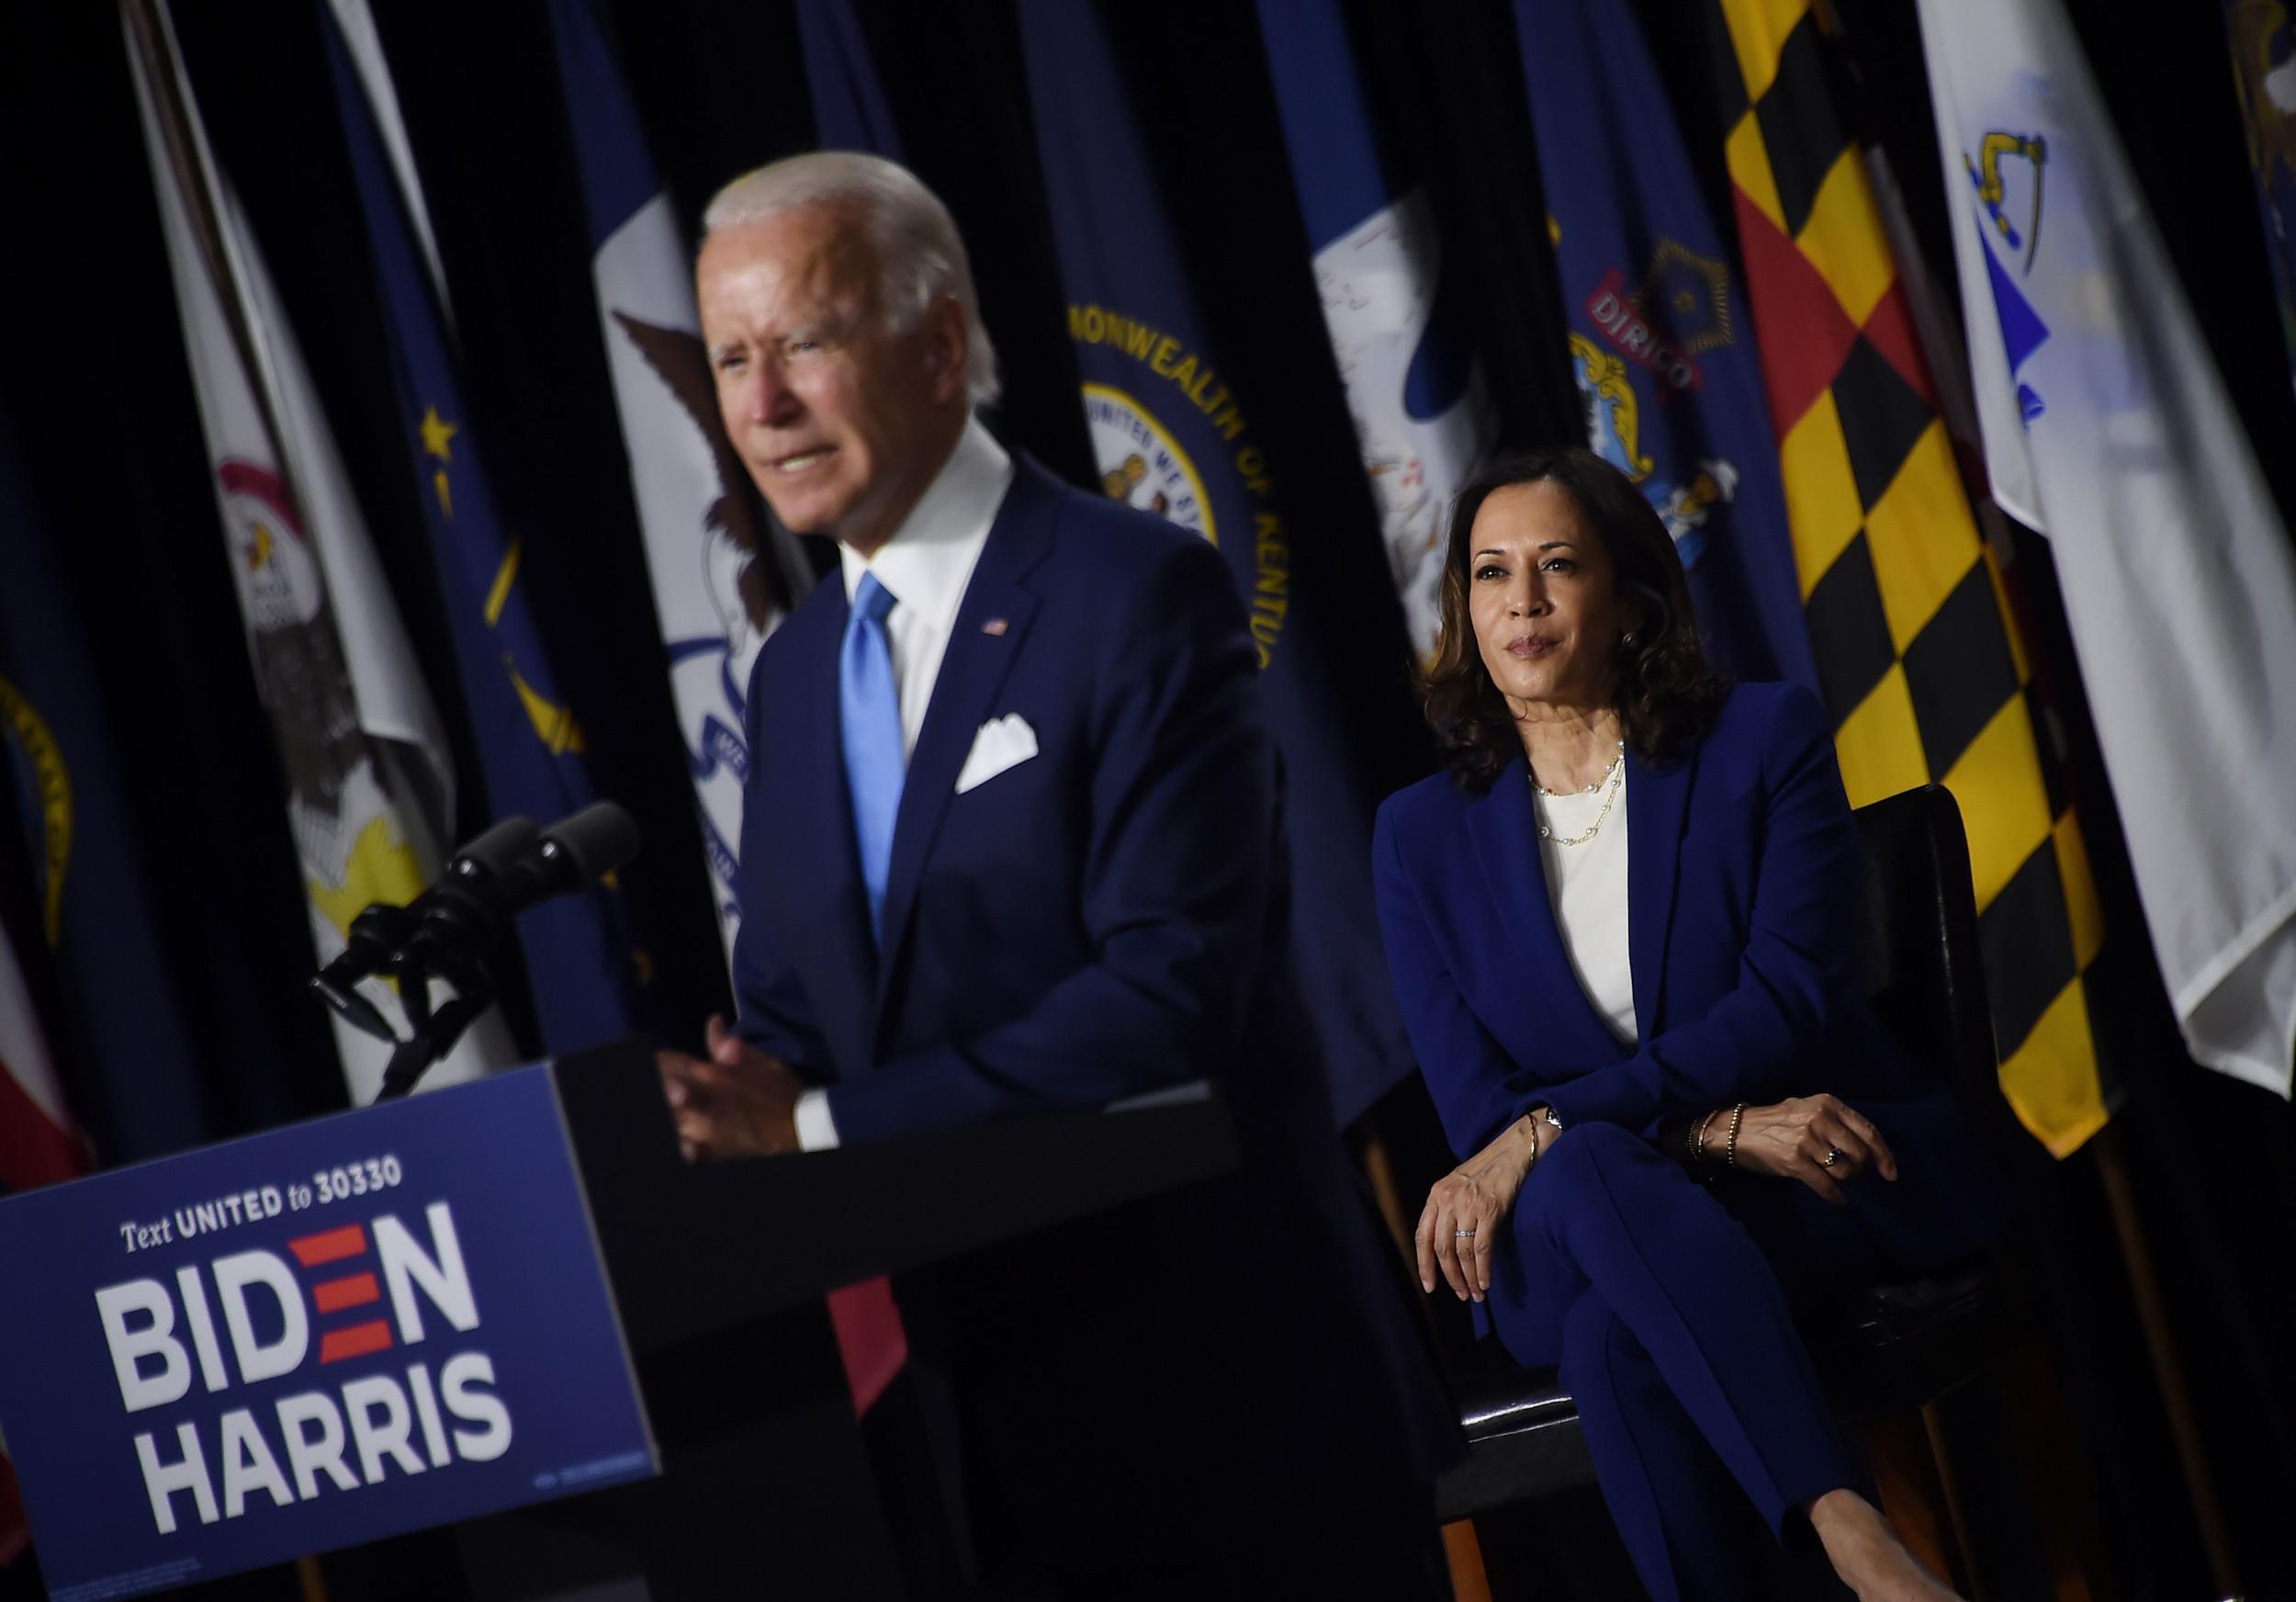 Biden leads Trump by 9 percentage points on eve of Democratic National Convention